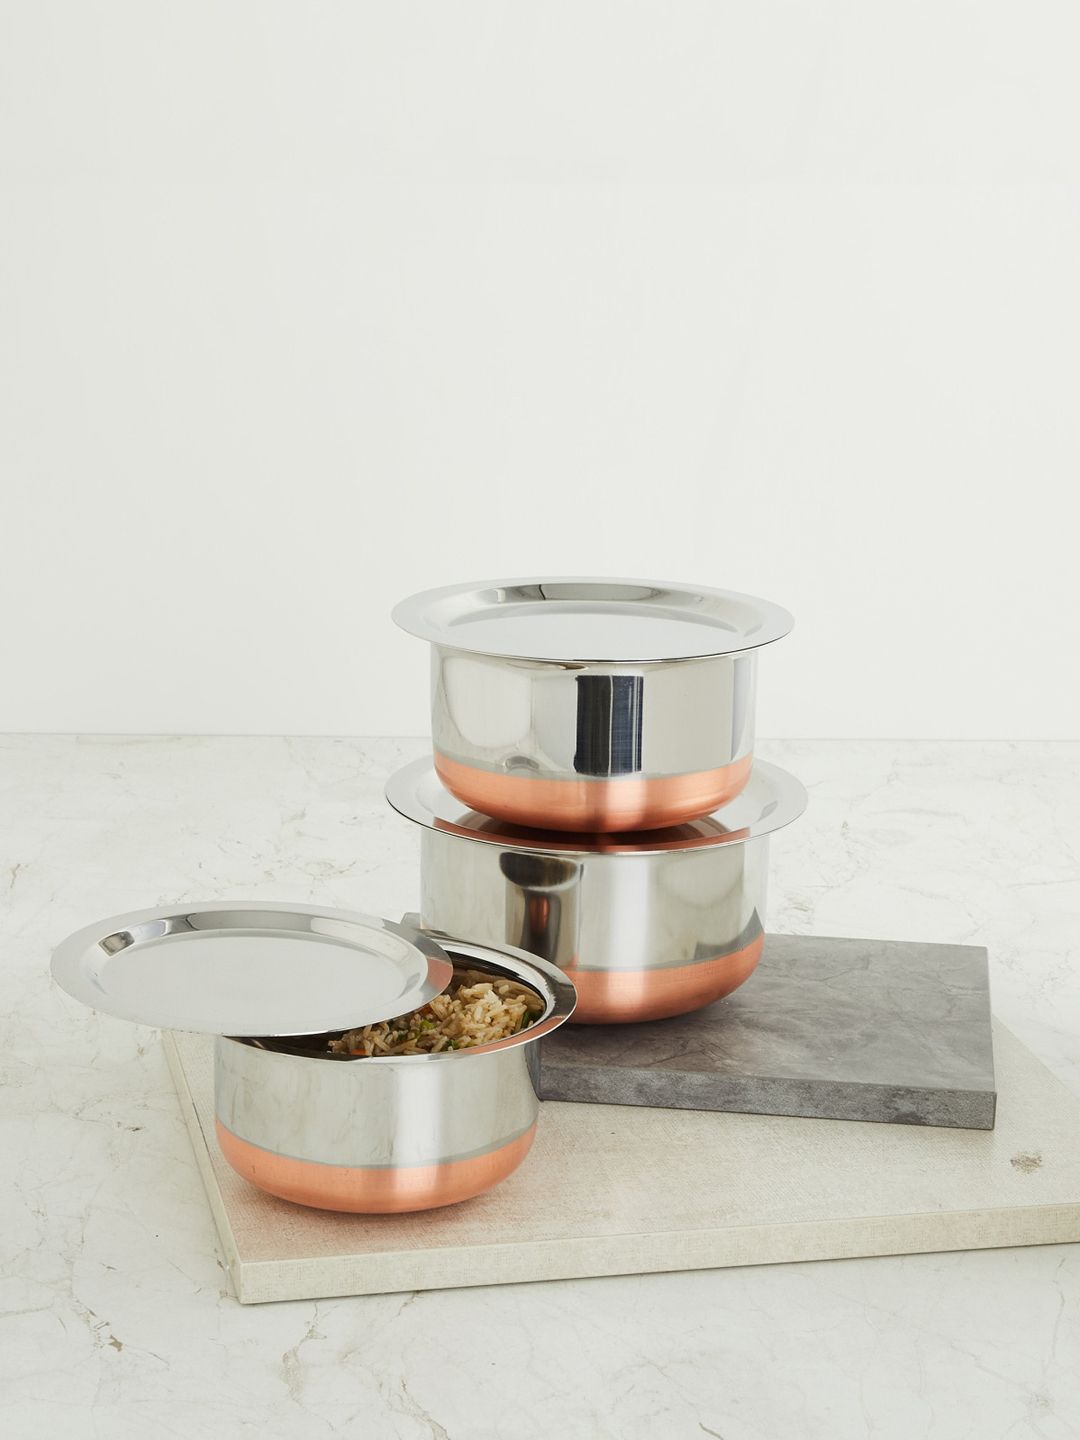 Home Centre Set Of 3 Silver & Copper-Toned Stainless Steel Sauce Pans With Lid Price in India